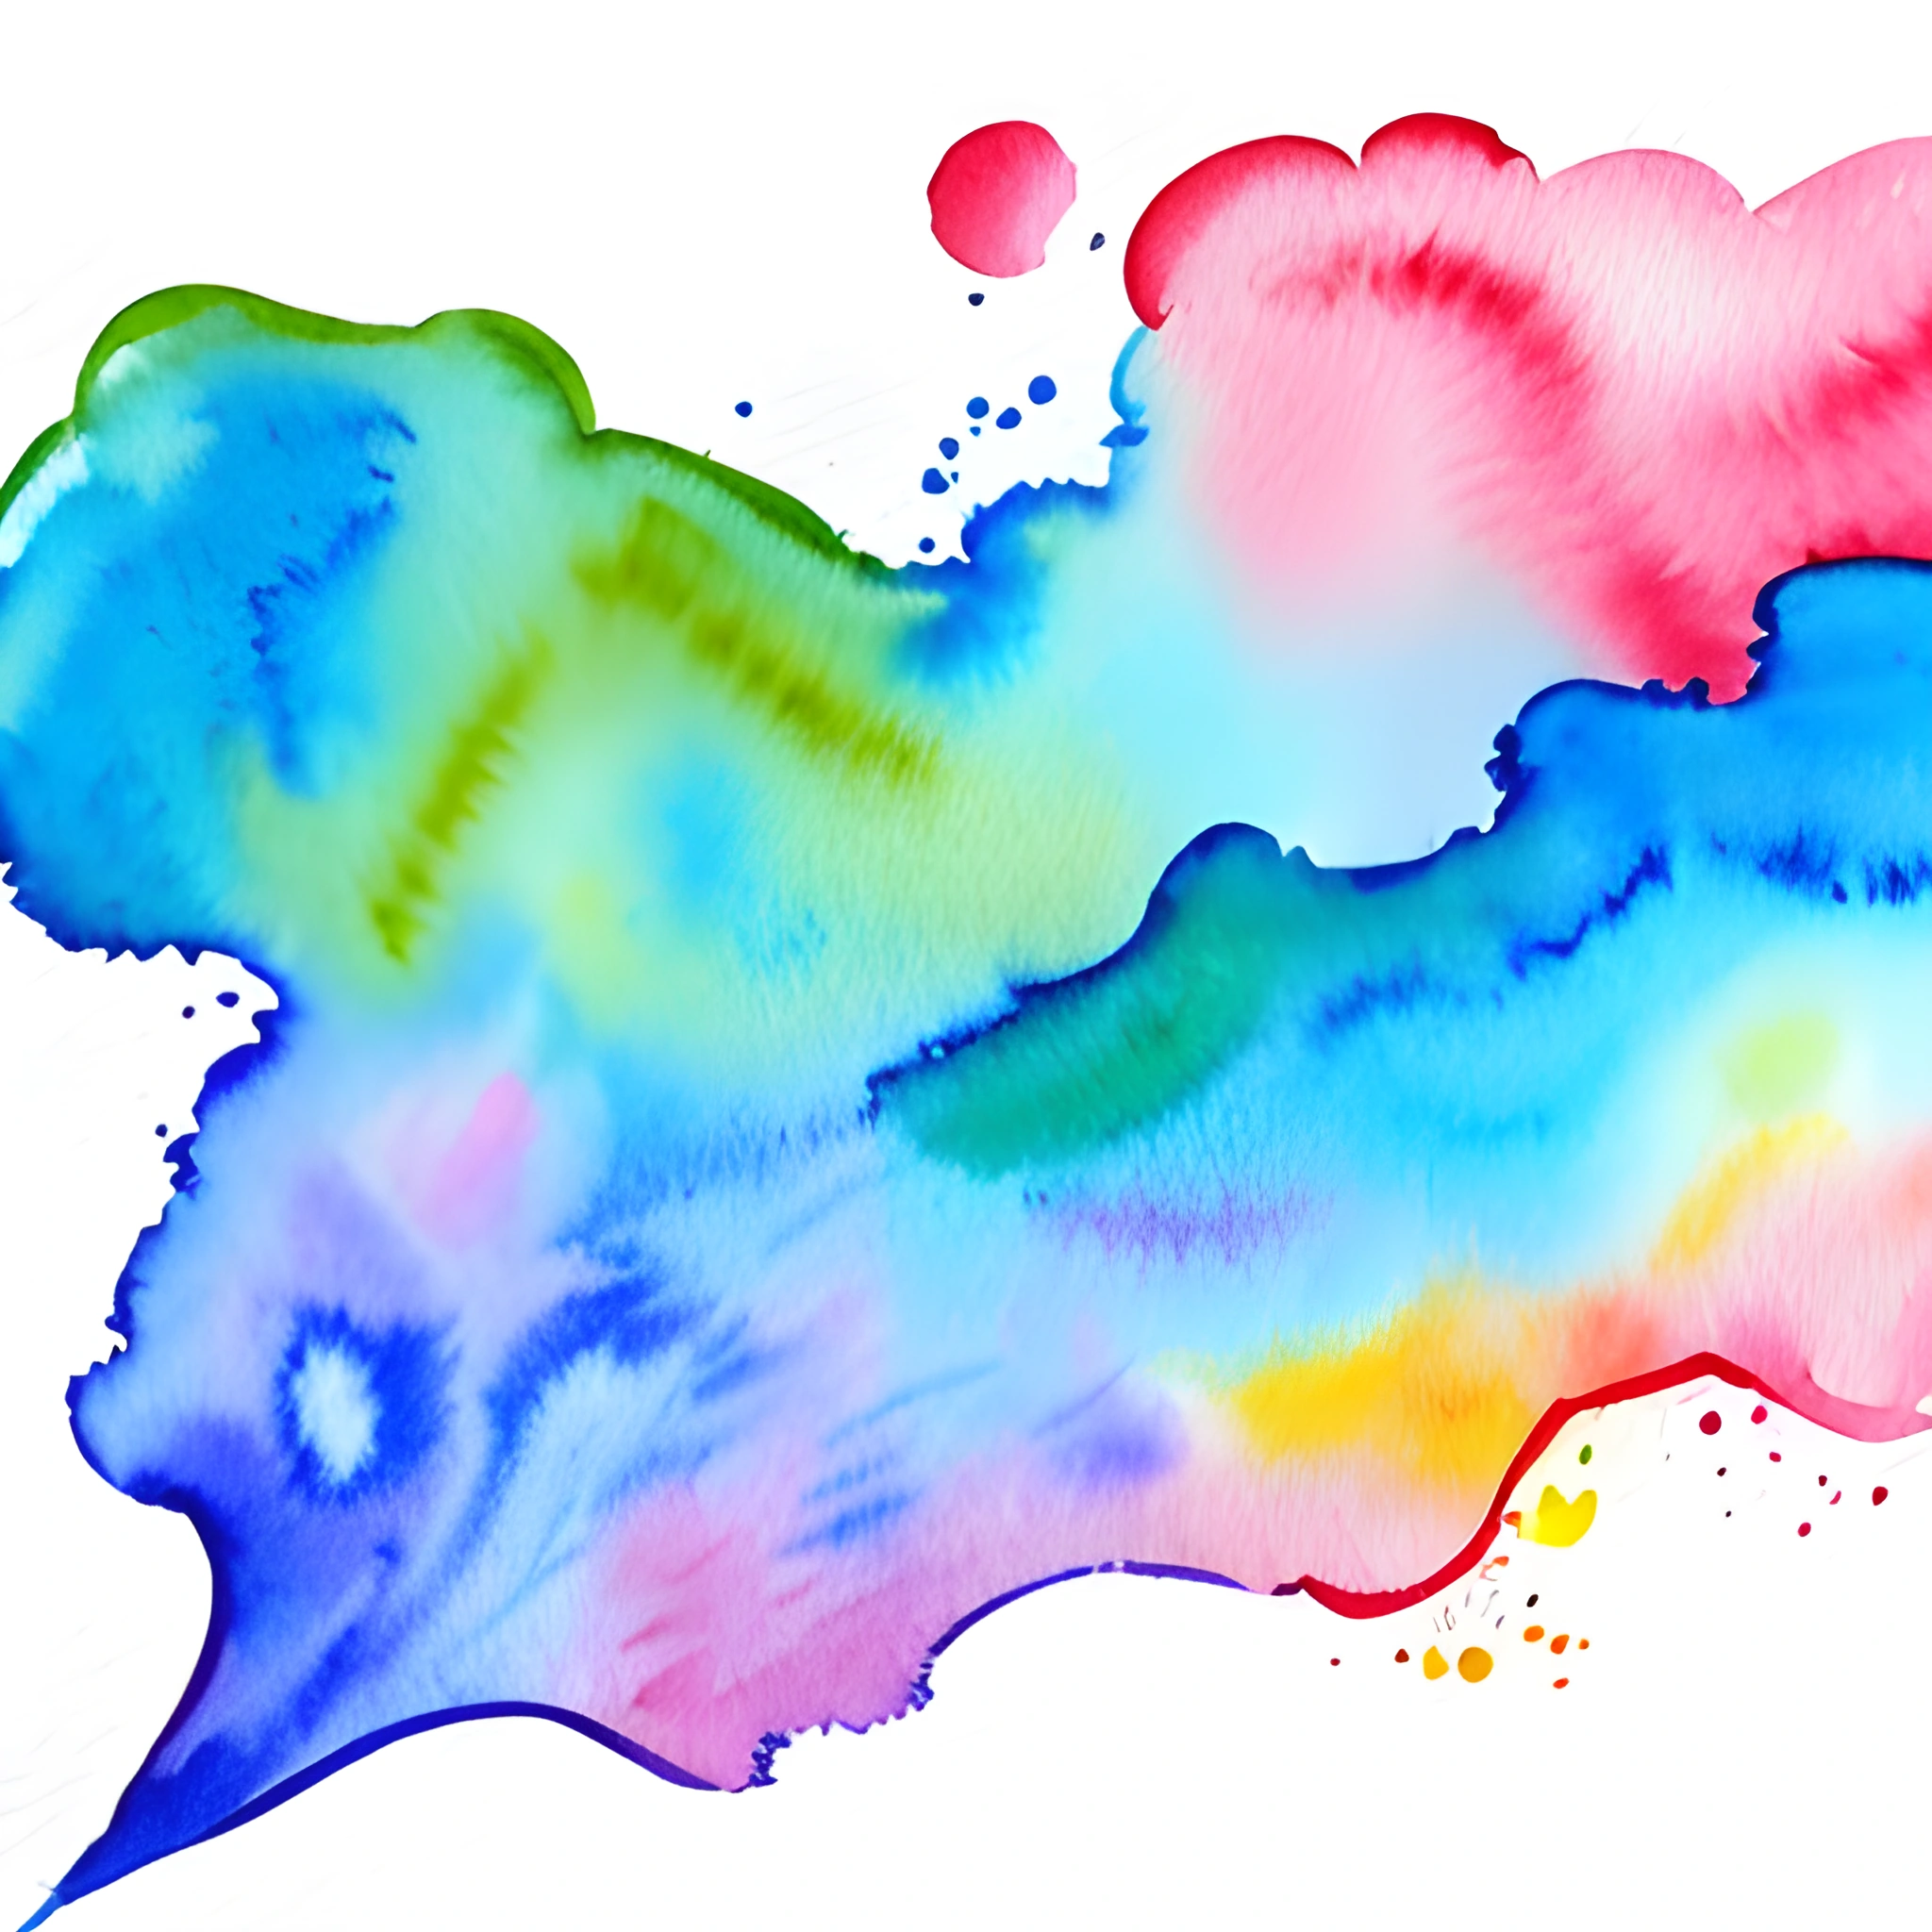 a painting of a colorful cloud with a rainbow of paint